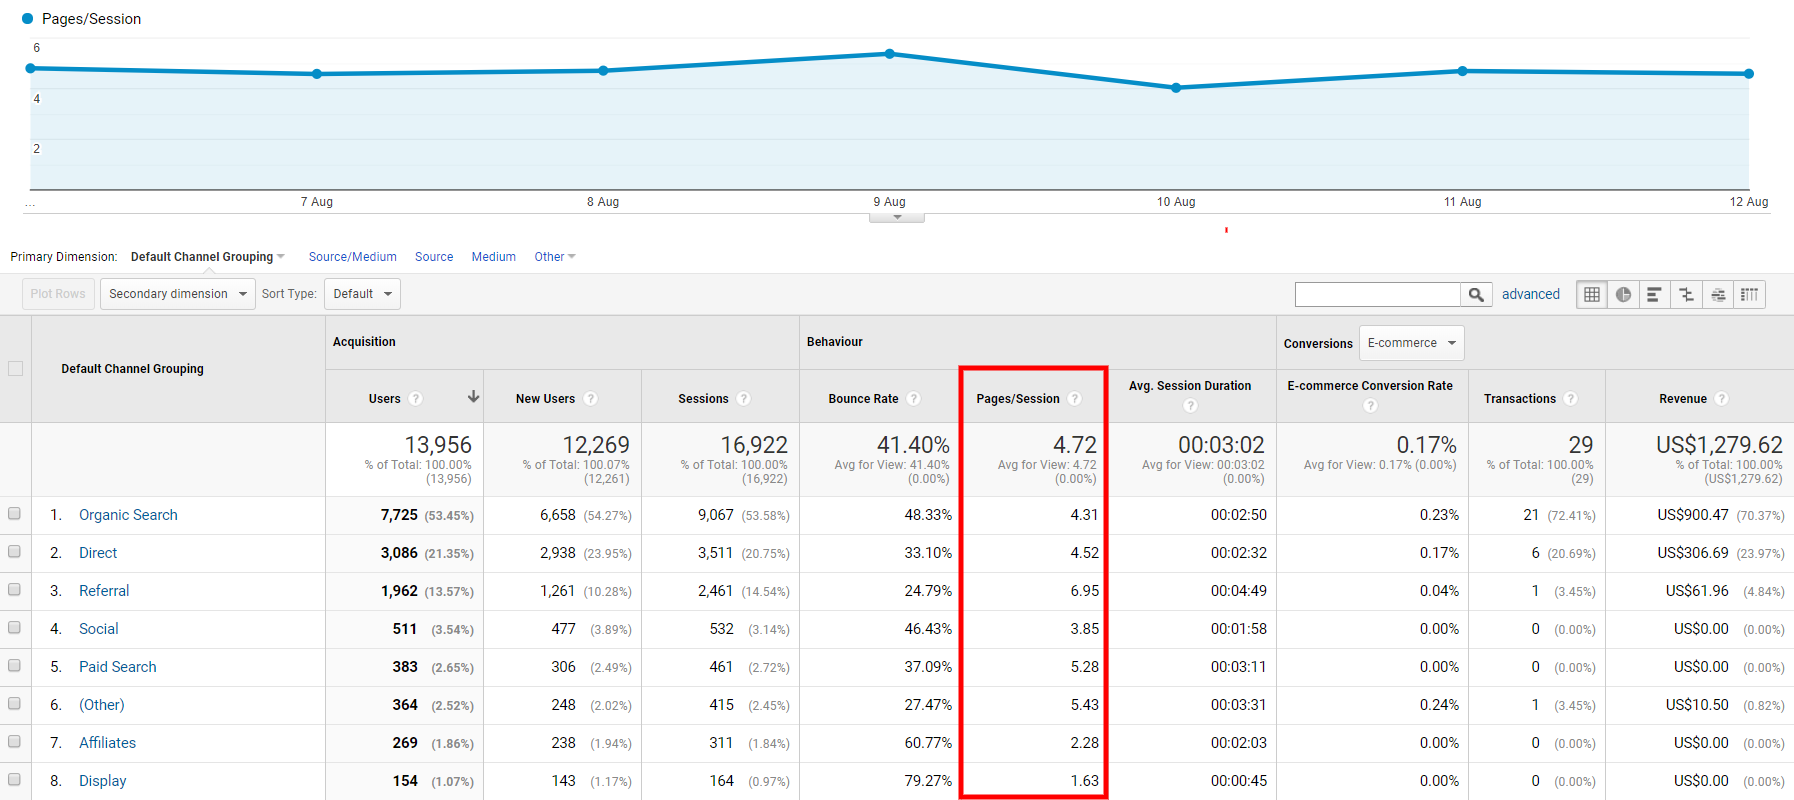 Data view of pages per session on Google Analytics